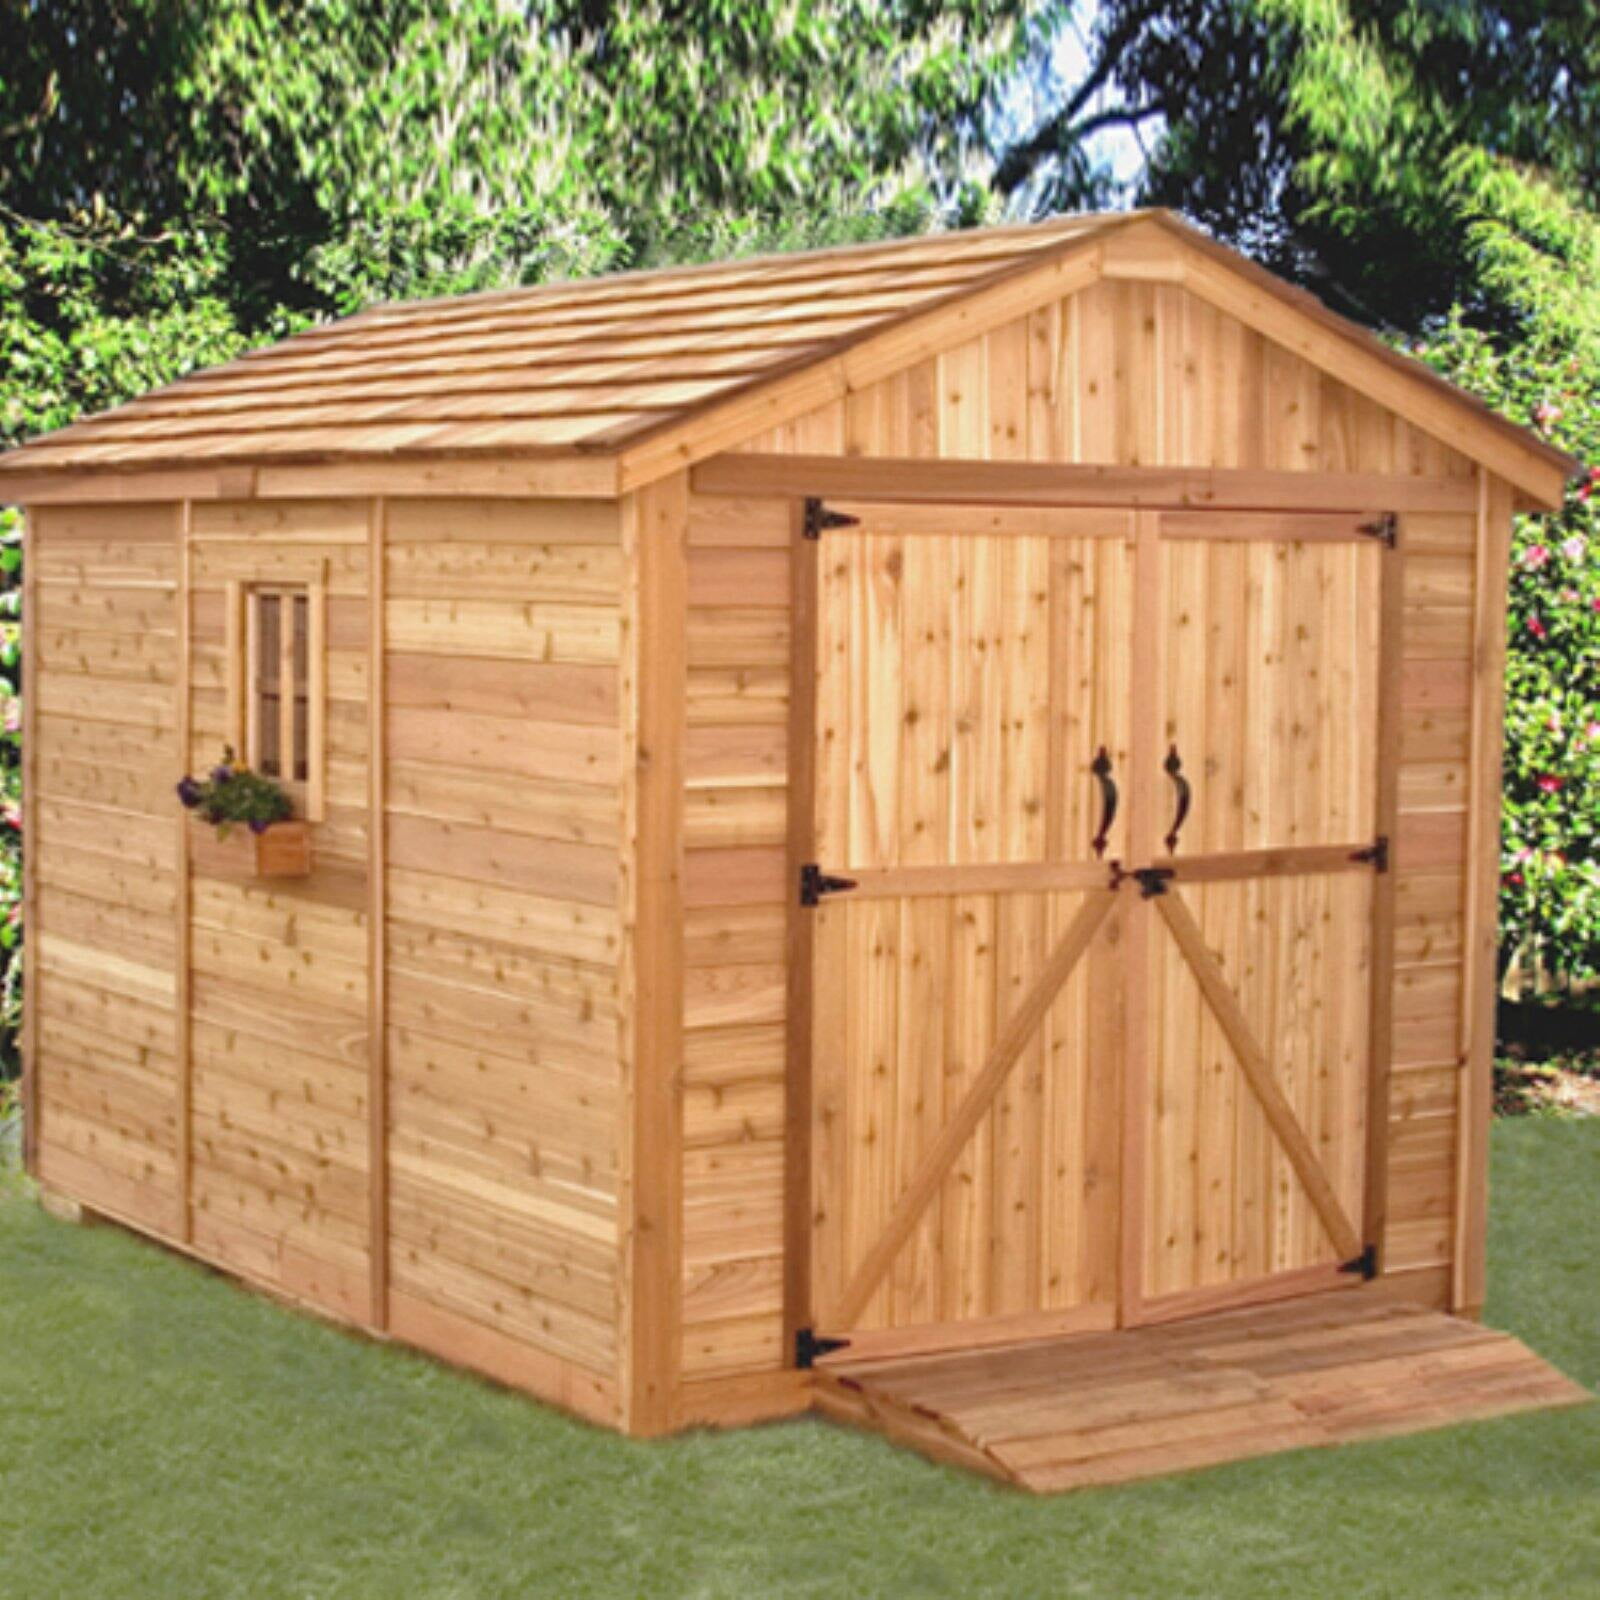 Outdoor Living Today SM812 SpaceMaker 8 x 12 ft. Storage Shed - Walmart ...